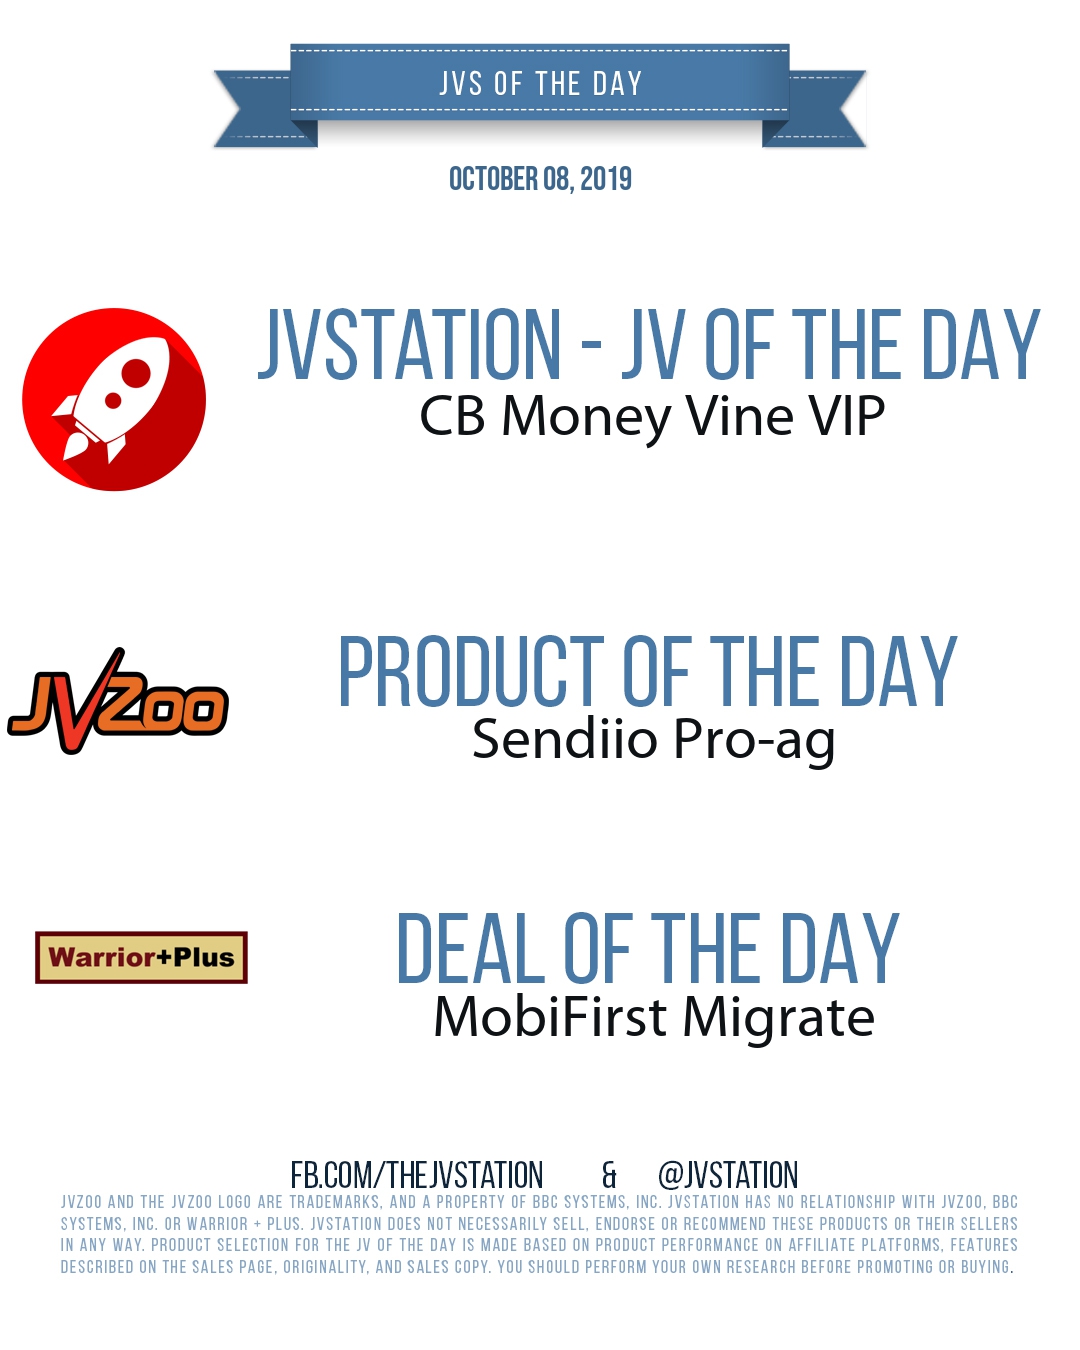 JVs of the day - October 08, 2019